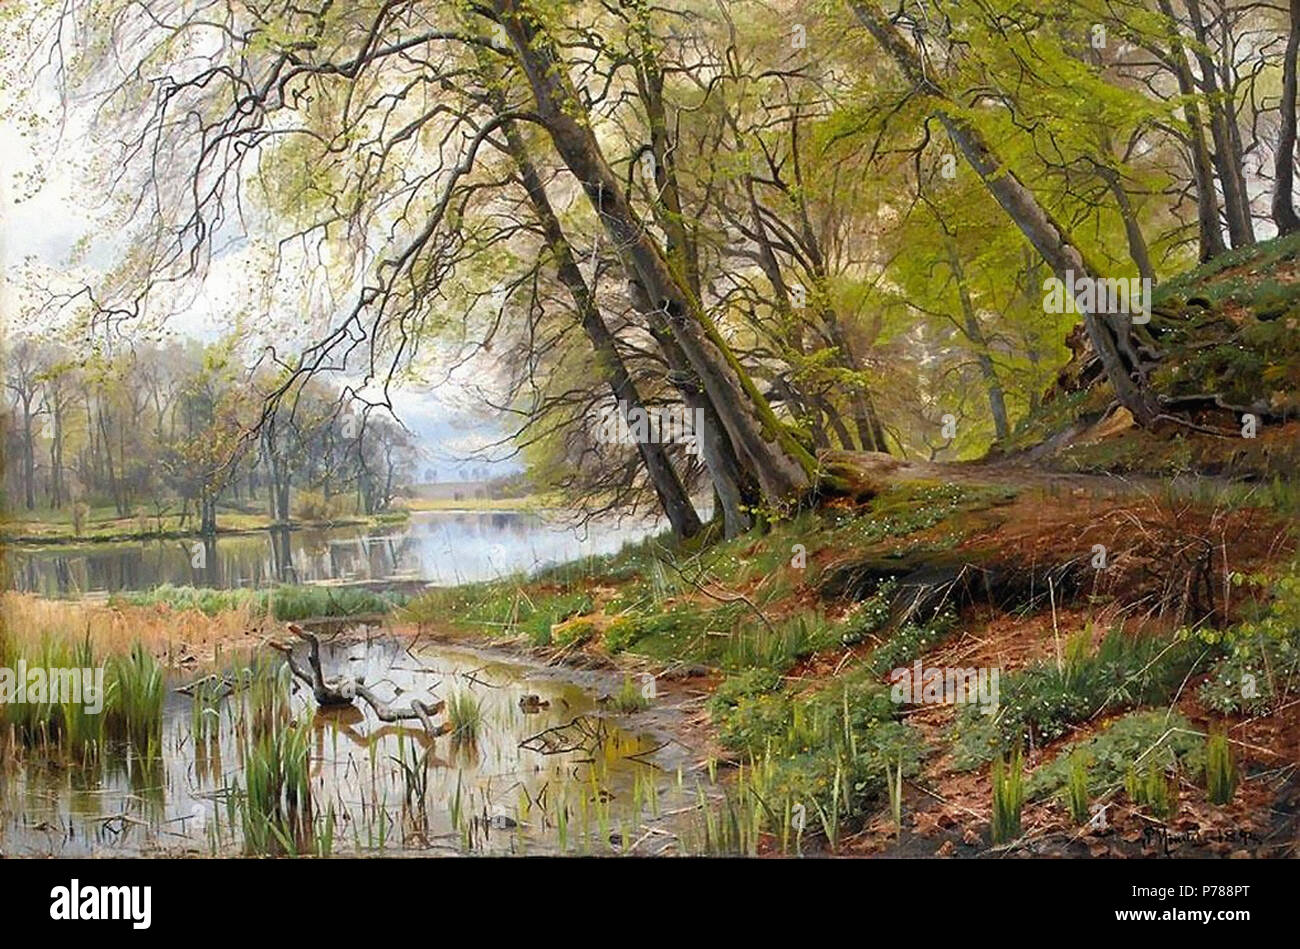 Peder Monsted Resolution Photography and - Alamy